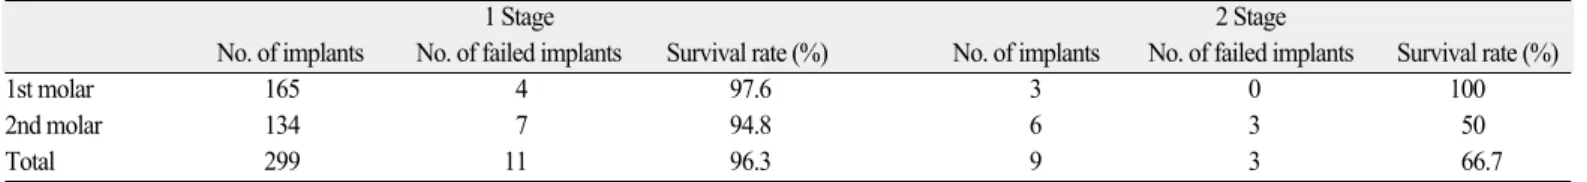 Table 6. Survival rate of implant site according to surgical method